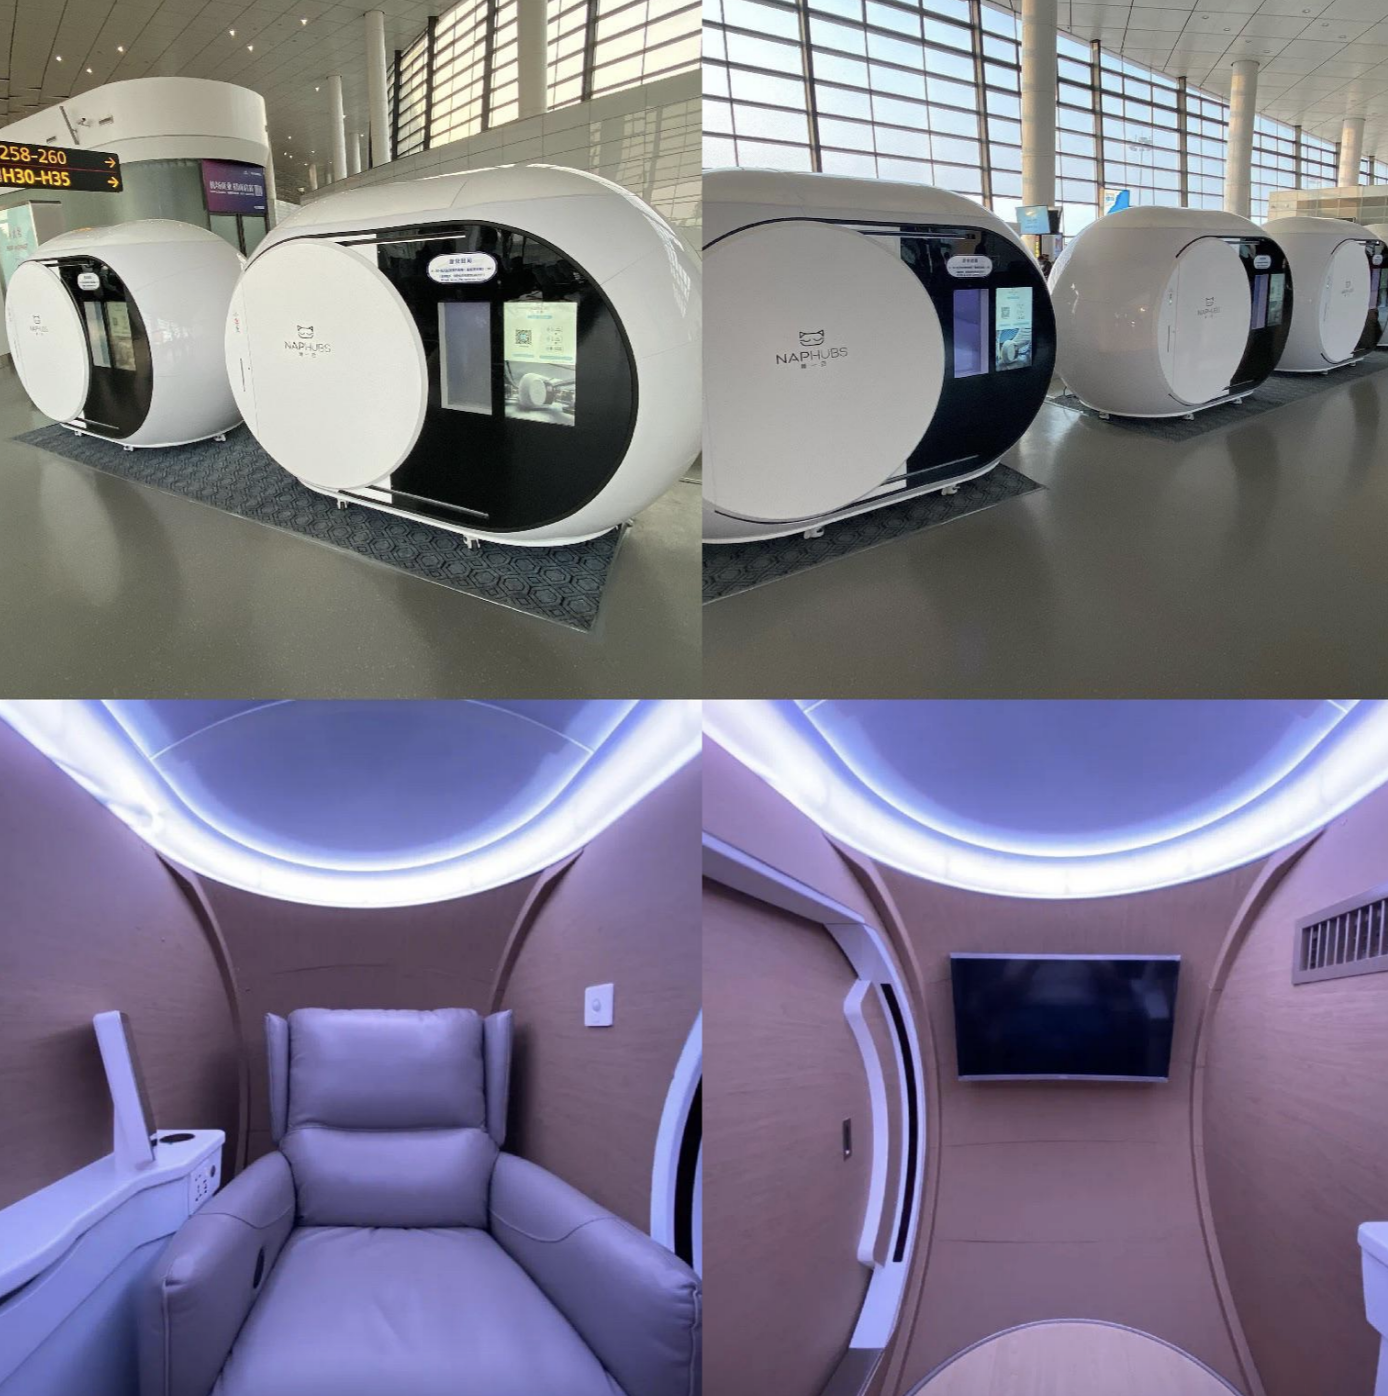 Compact sleeping pods in an airport with a chair and TV inside